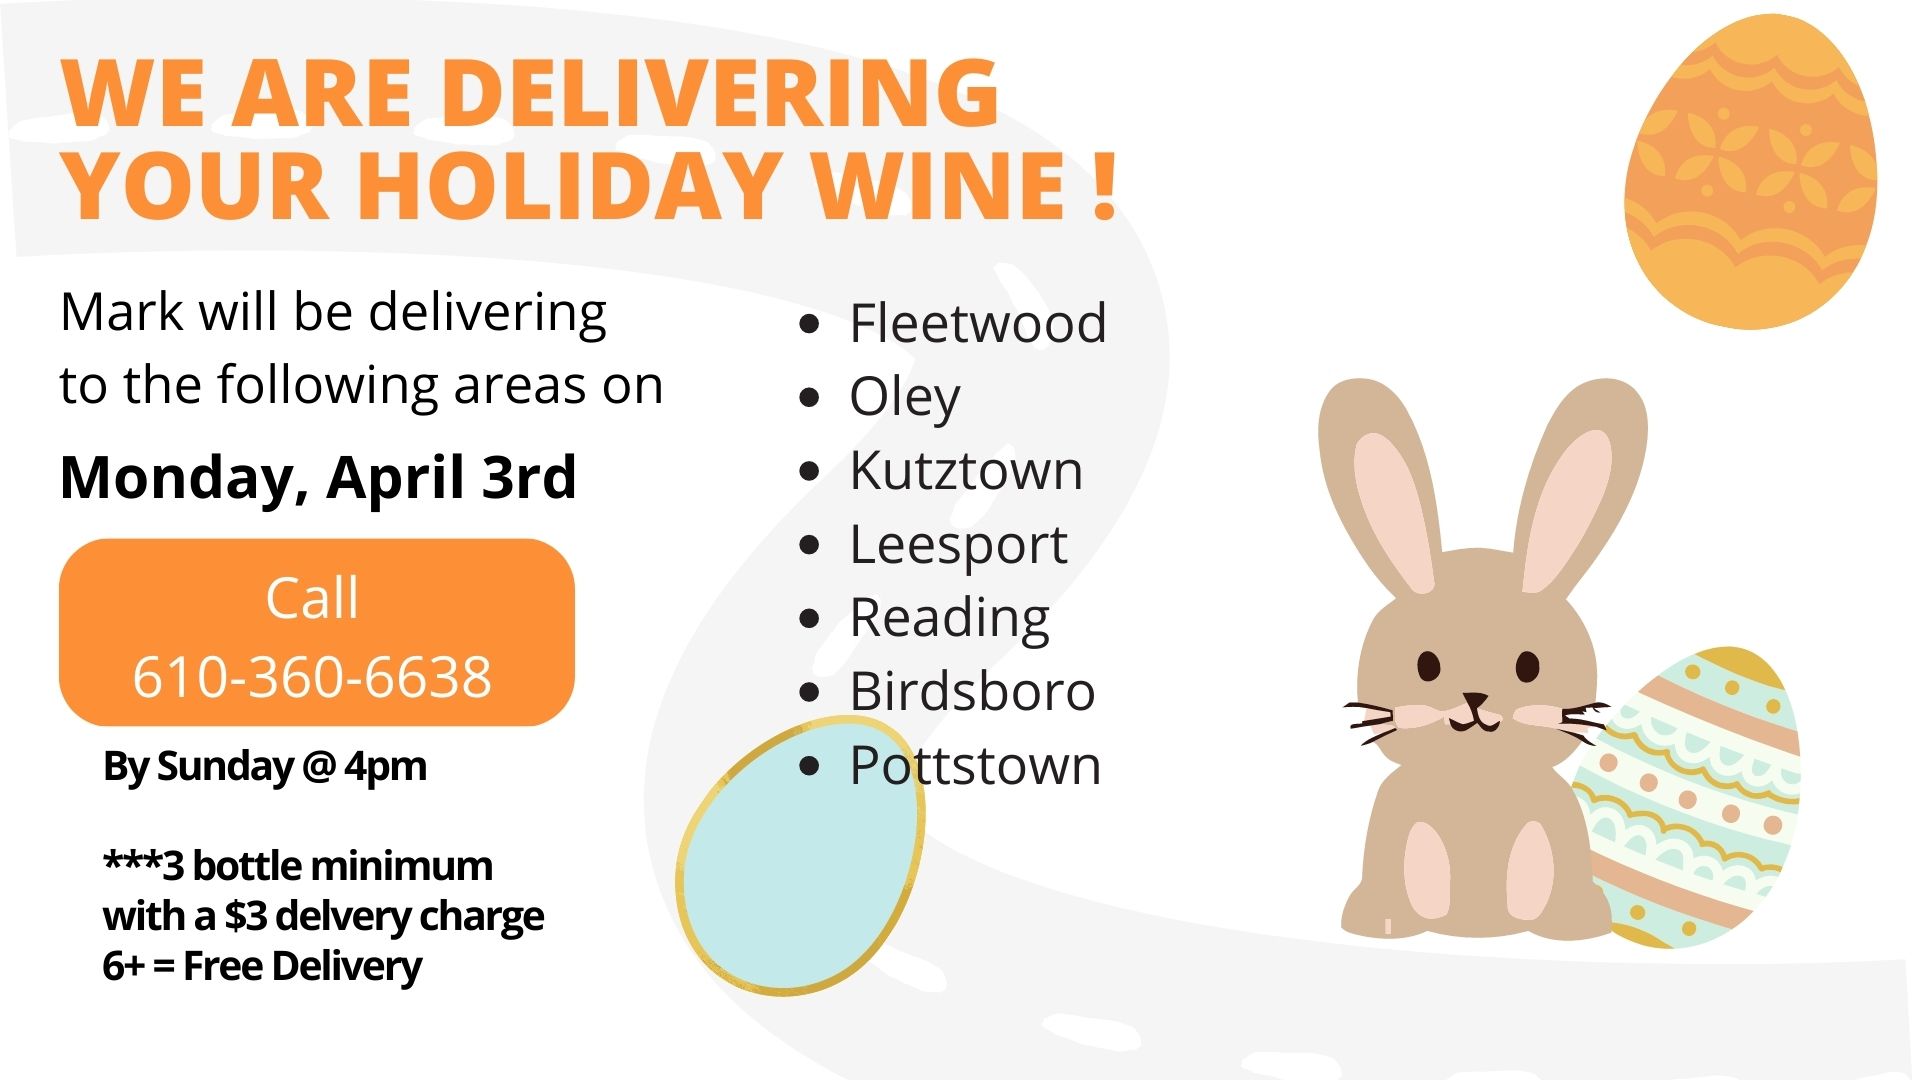 We are delivering your holiday wine!